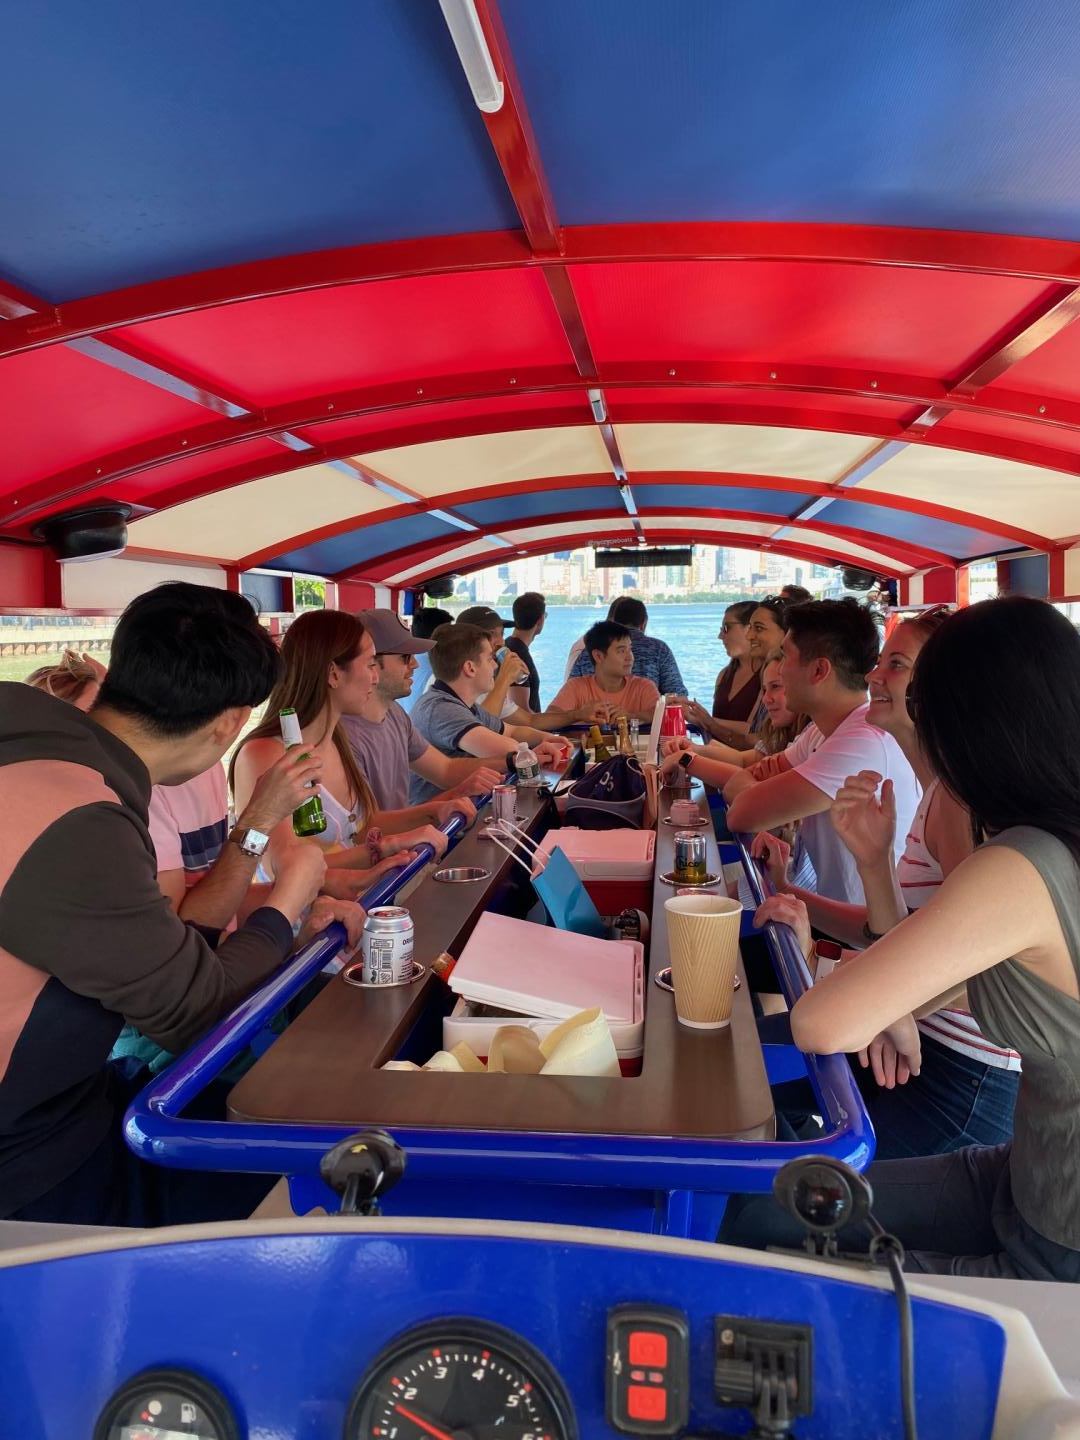 NYC Cycleboats 5% OFF Any Tour - https://nyccycleboats.com/pages/booking